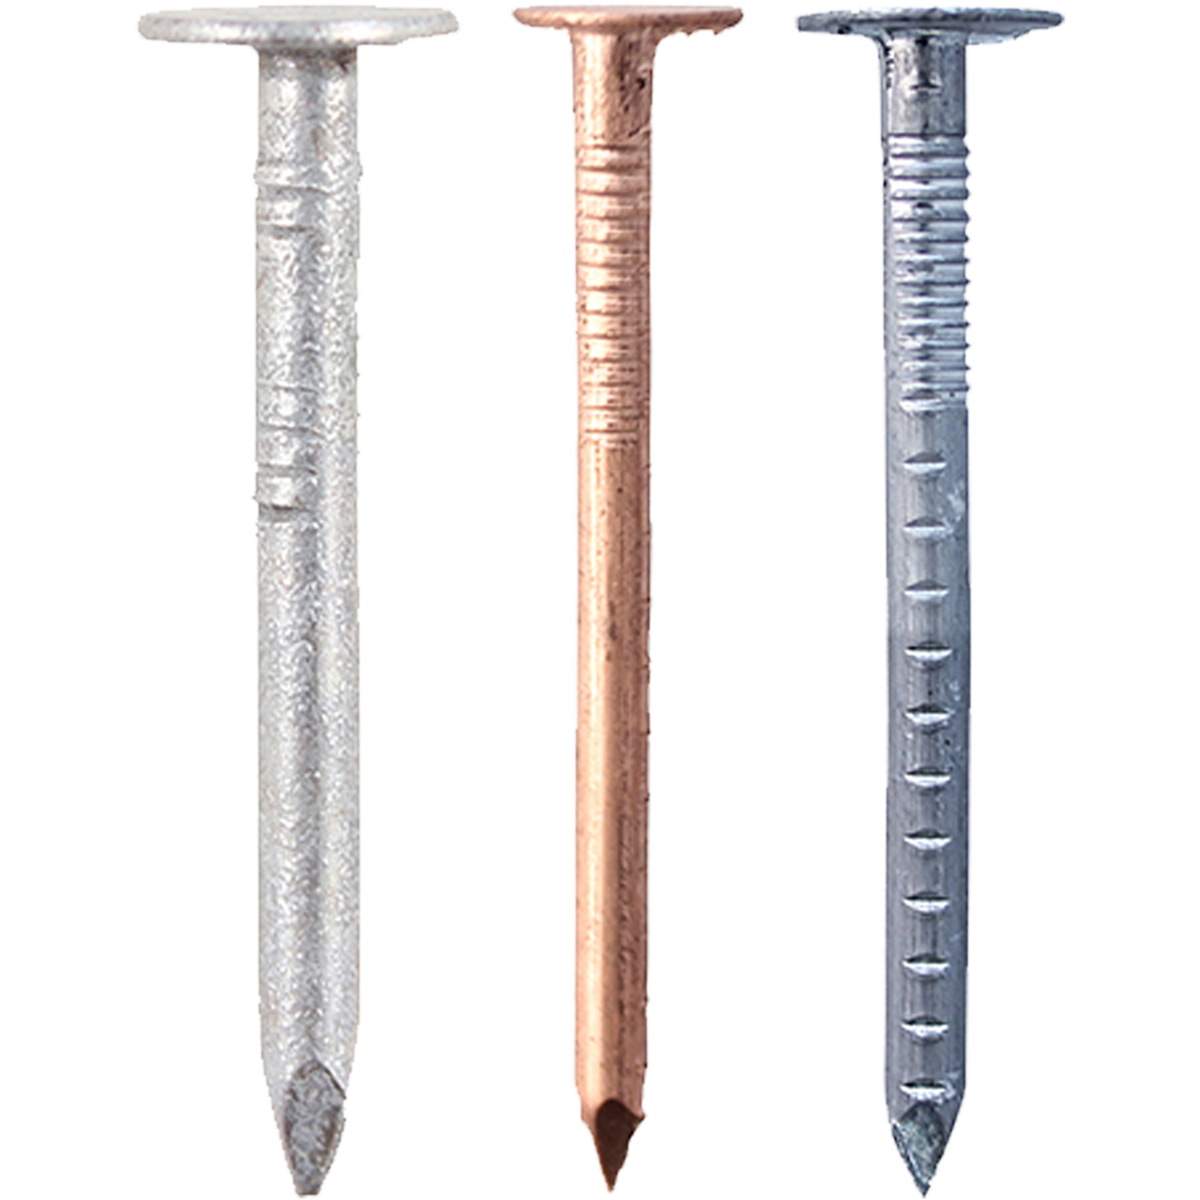 Clout nails in a selection of materials including copper, aluminium and galvanised in various sizes